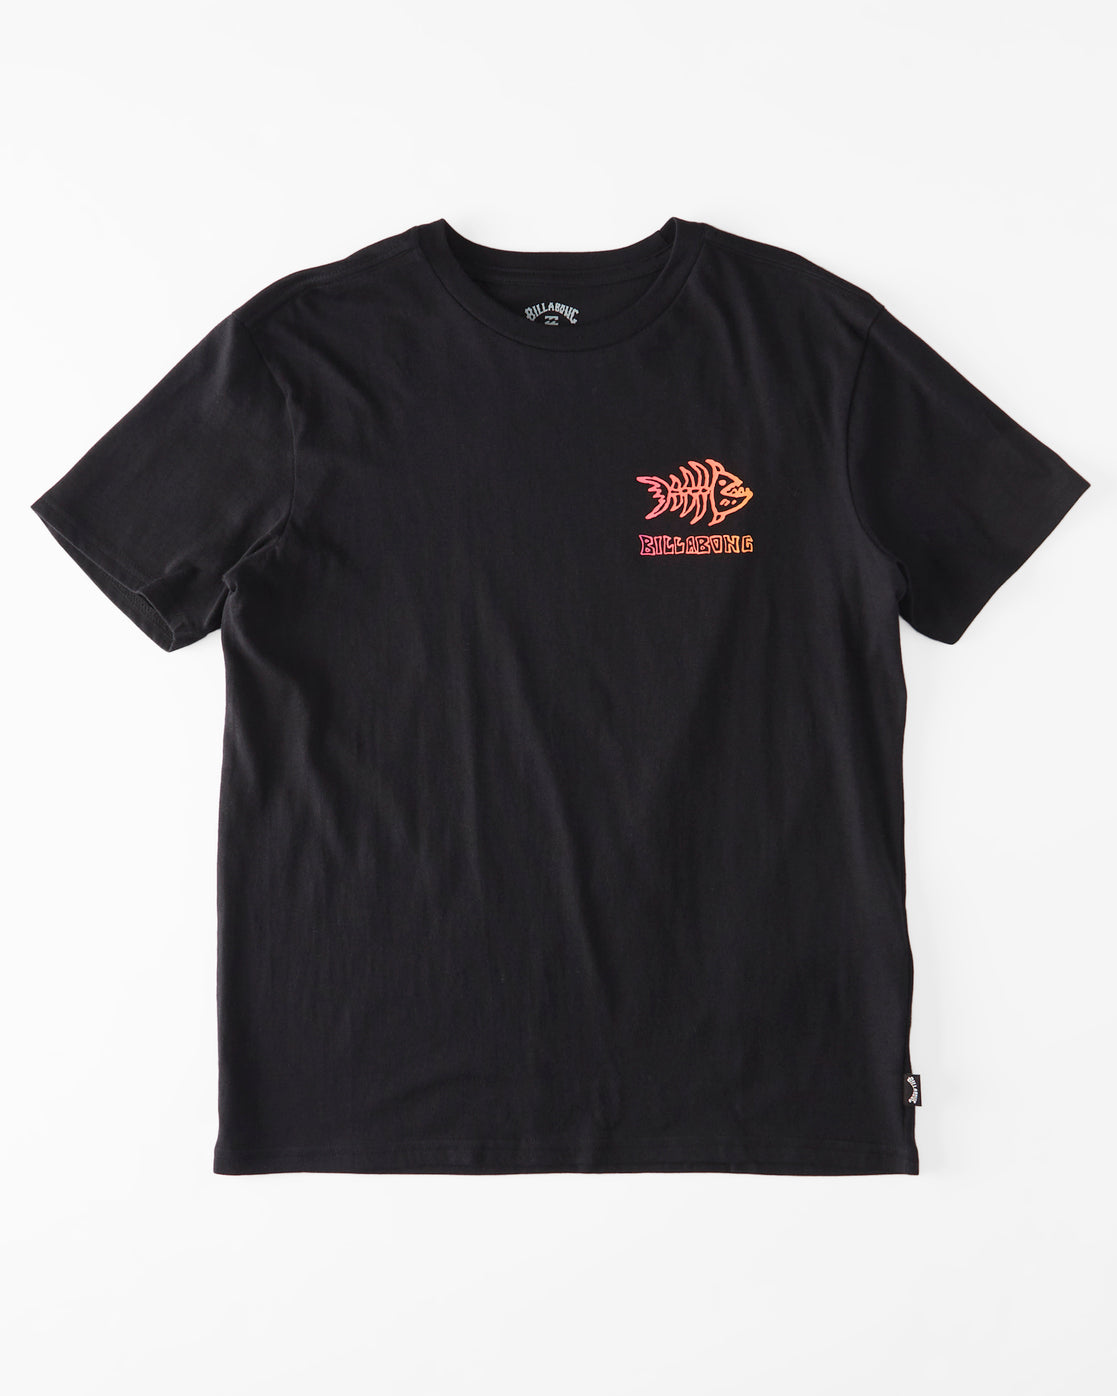 Billabong Sharky Groms Tee in black from front